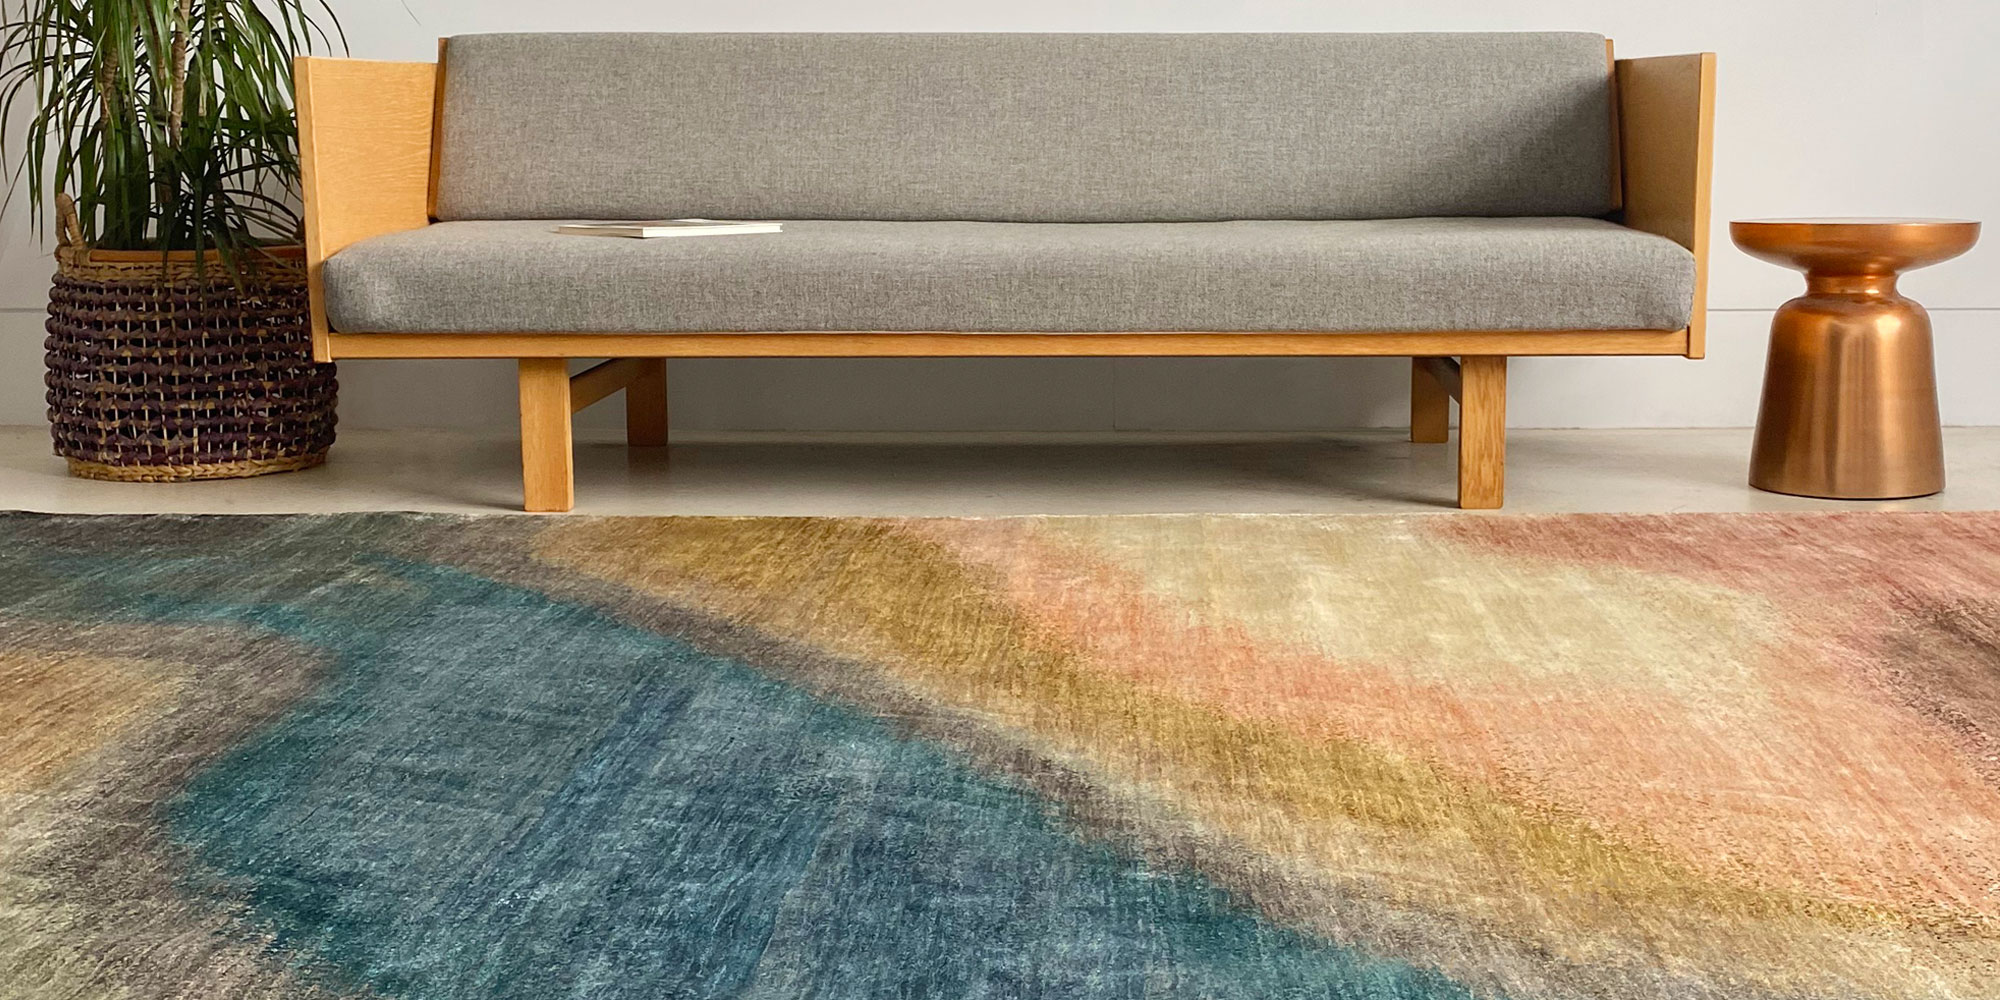 Buying rugs in Sydney - Sydney's favourite rugs